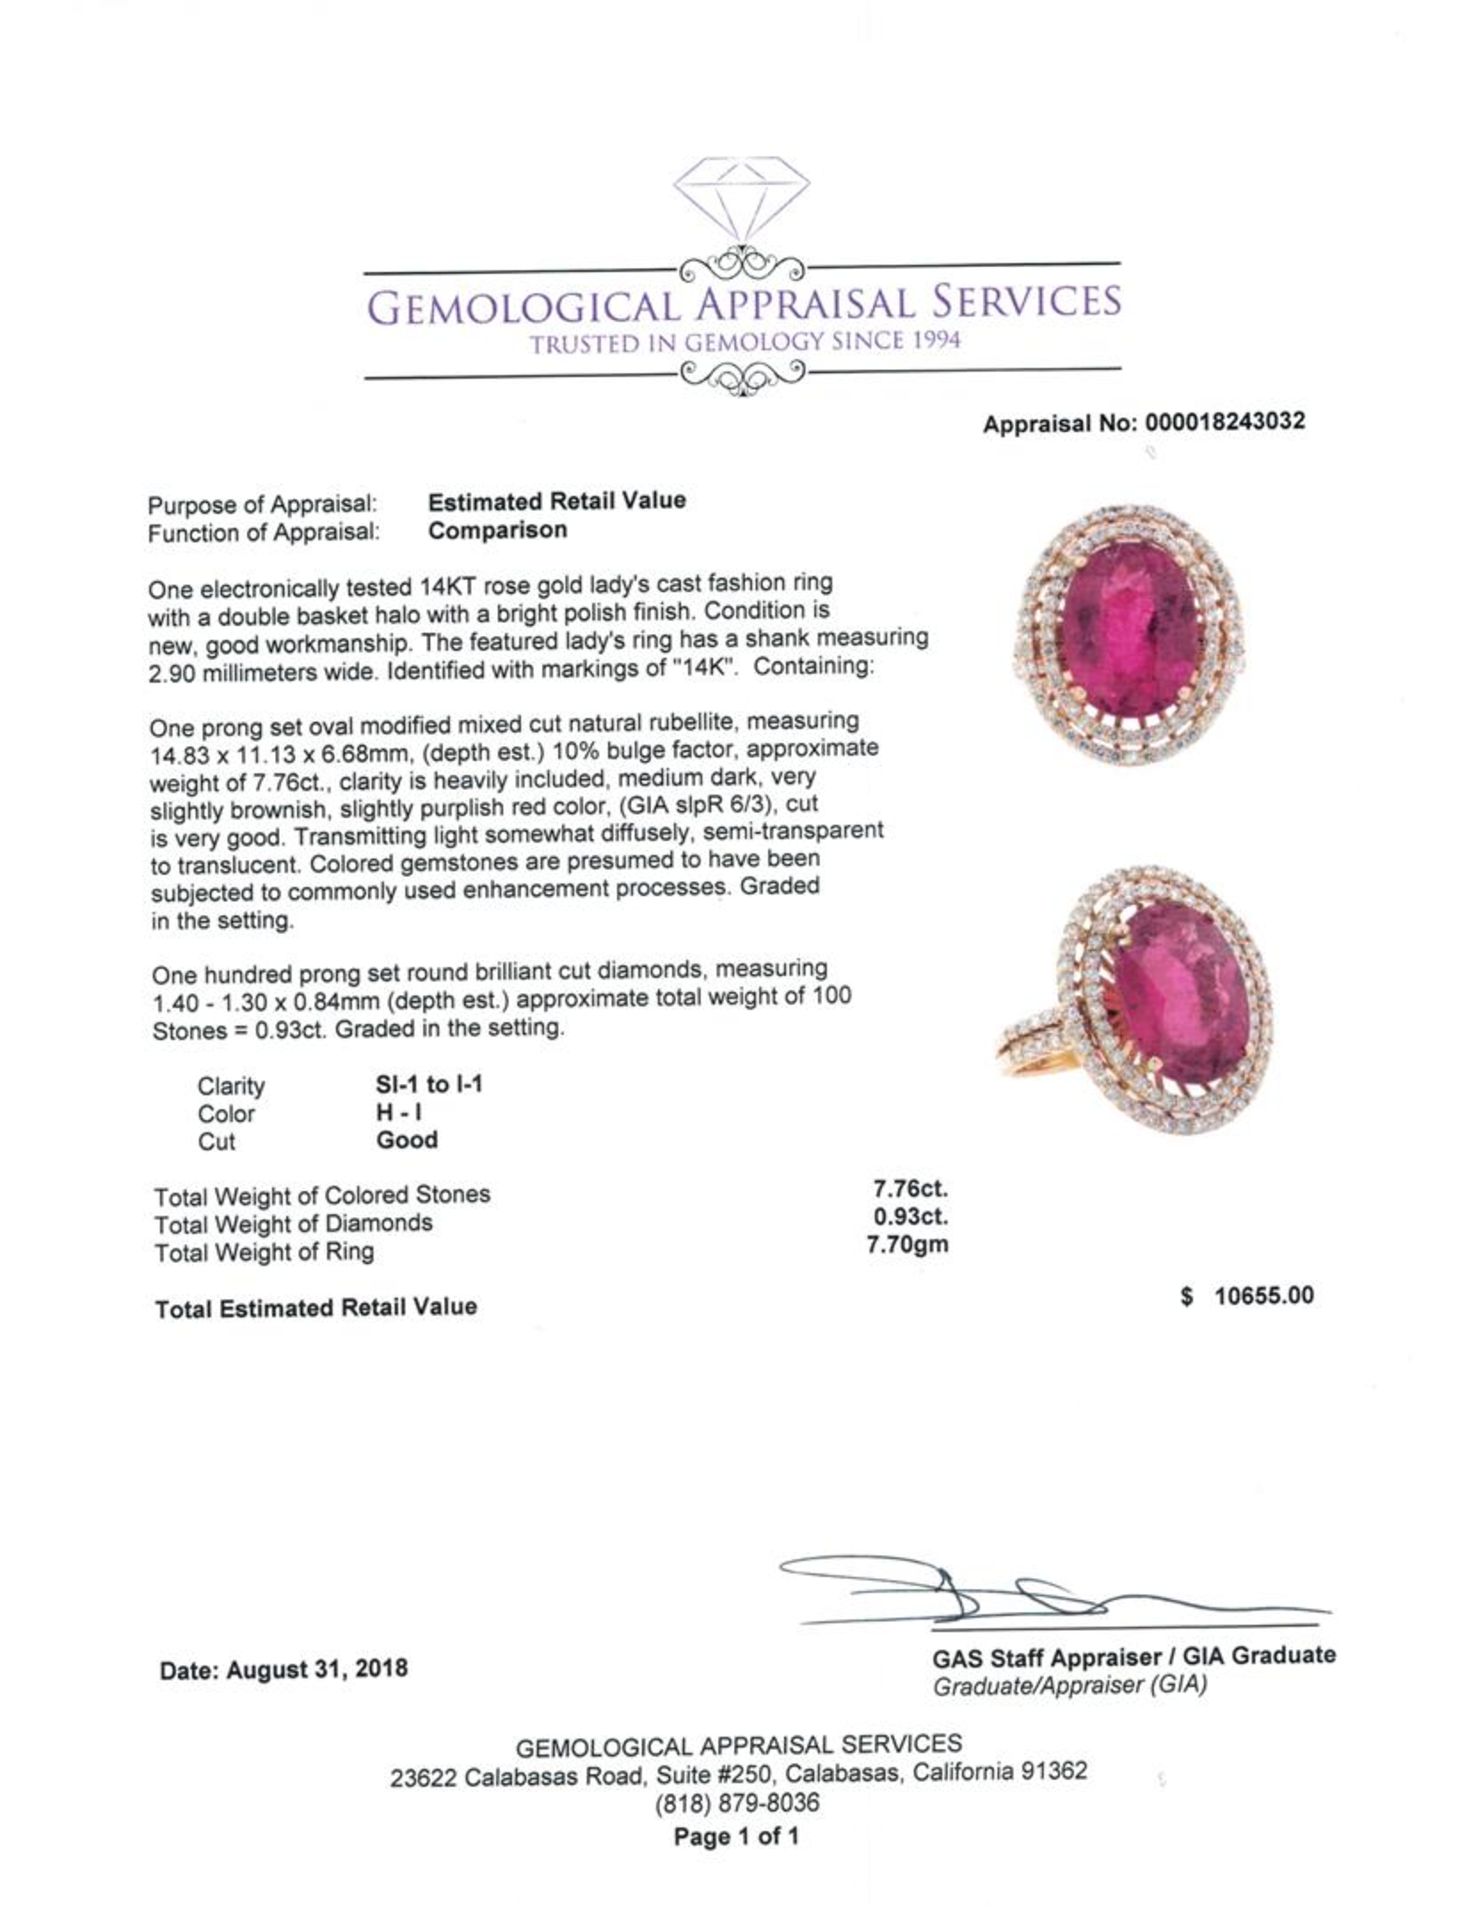 8.69 ctw Oval Mixed Rubellite And Round Brilliant Cut Diamond Ring - 14KT Rose G - Image 5 of 5